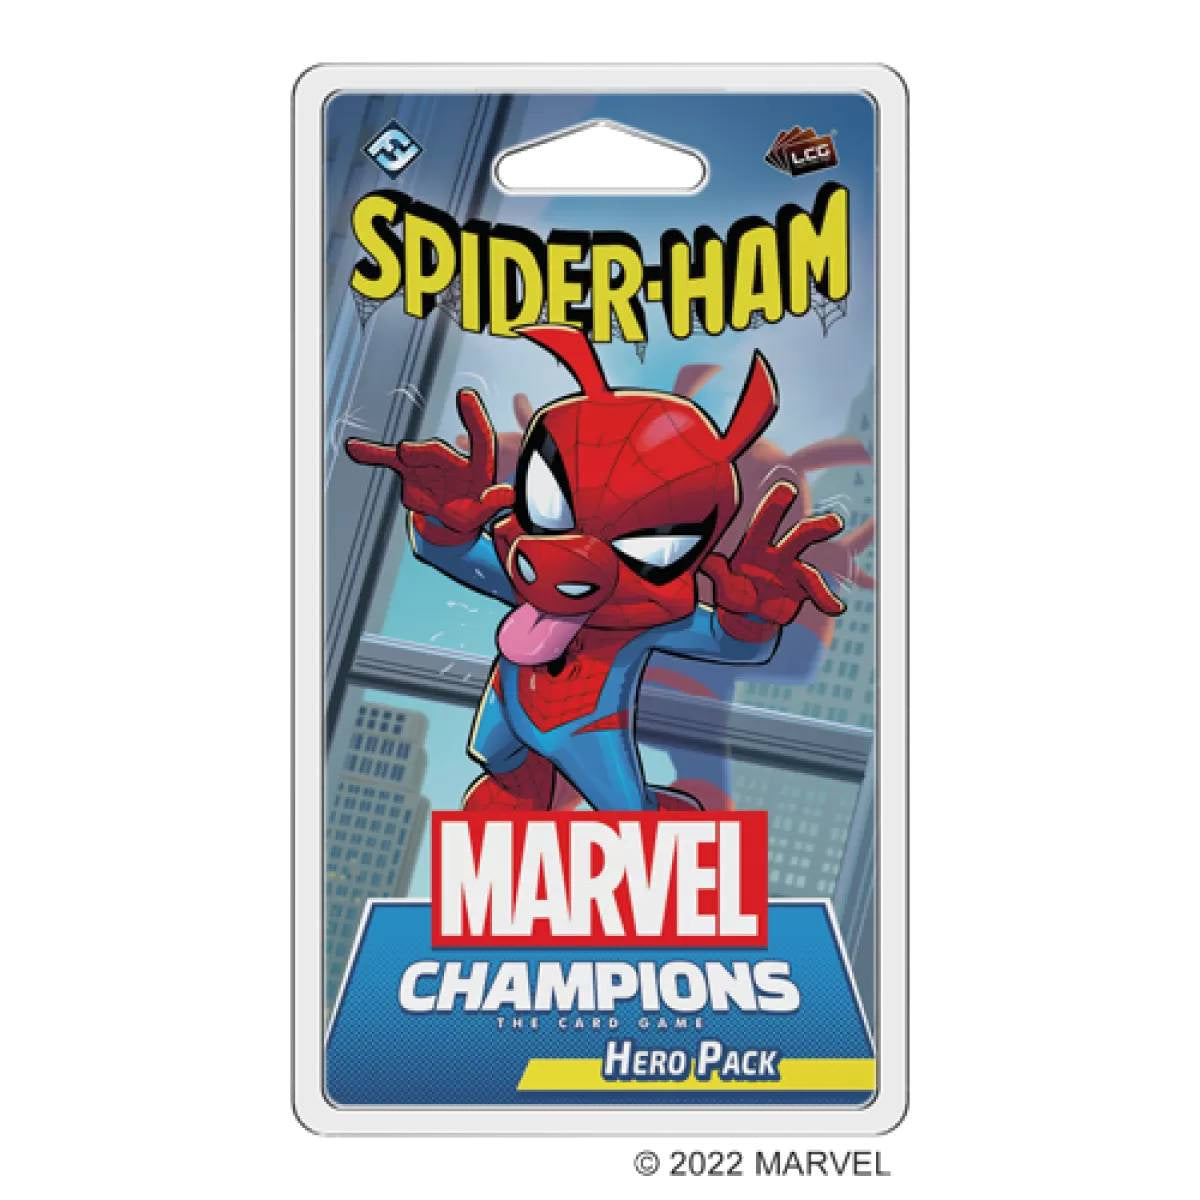 Marvel Champions The Card Game - Spider-Ham Hero Pack